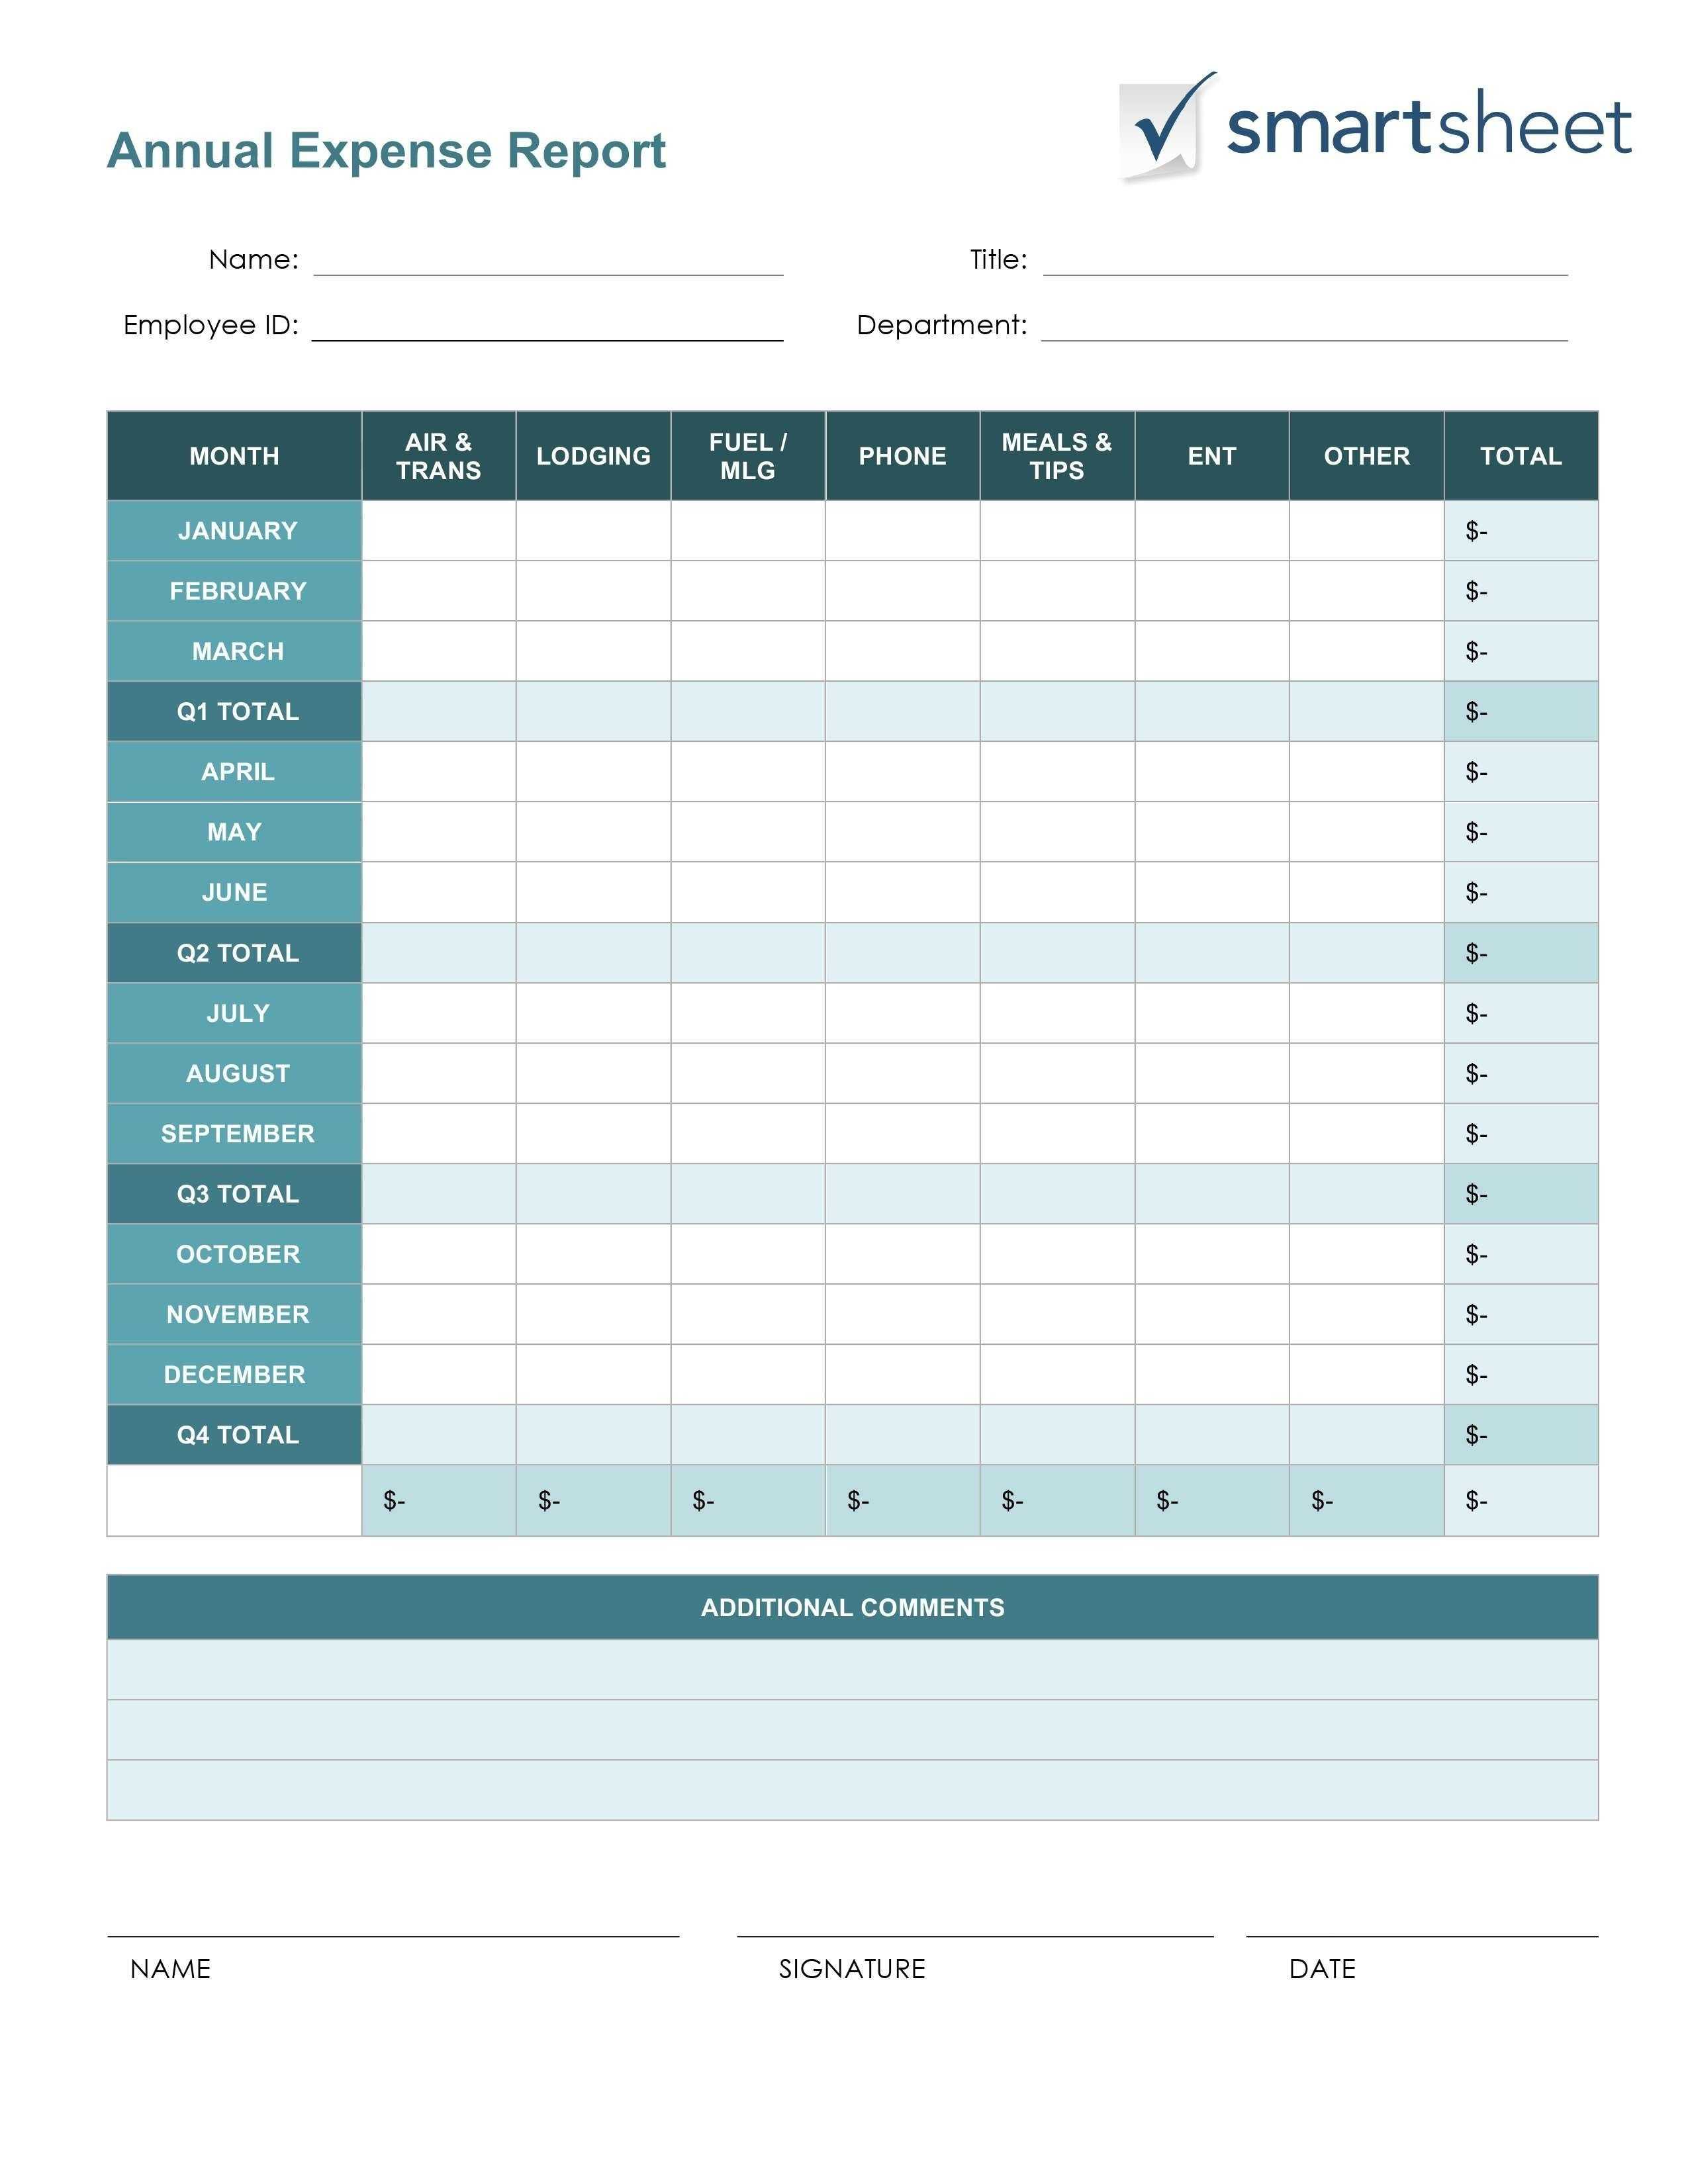 New Expenses Excel #exceltemplate #xls #xlstemplate With Expense Report Template Xls